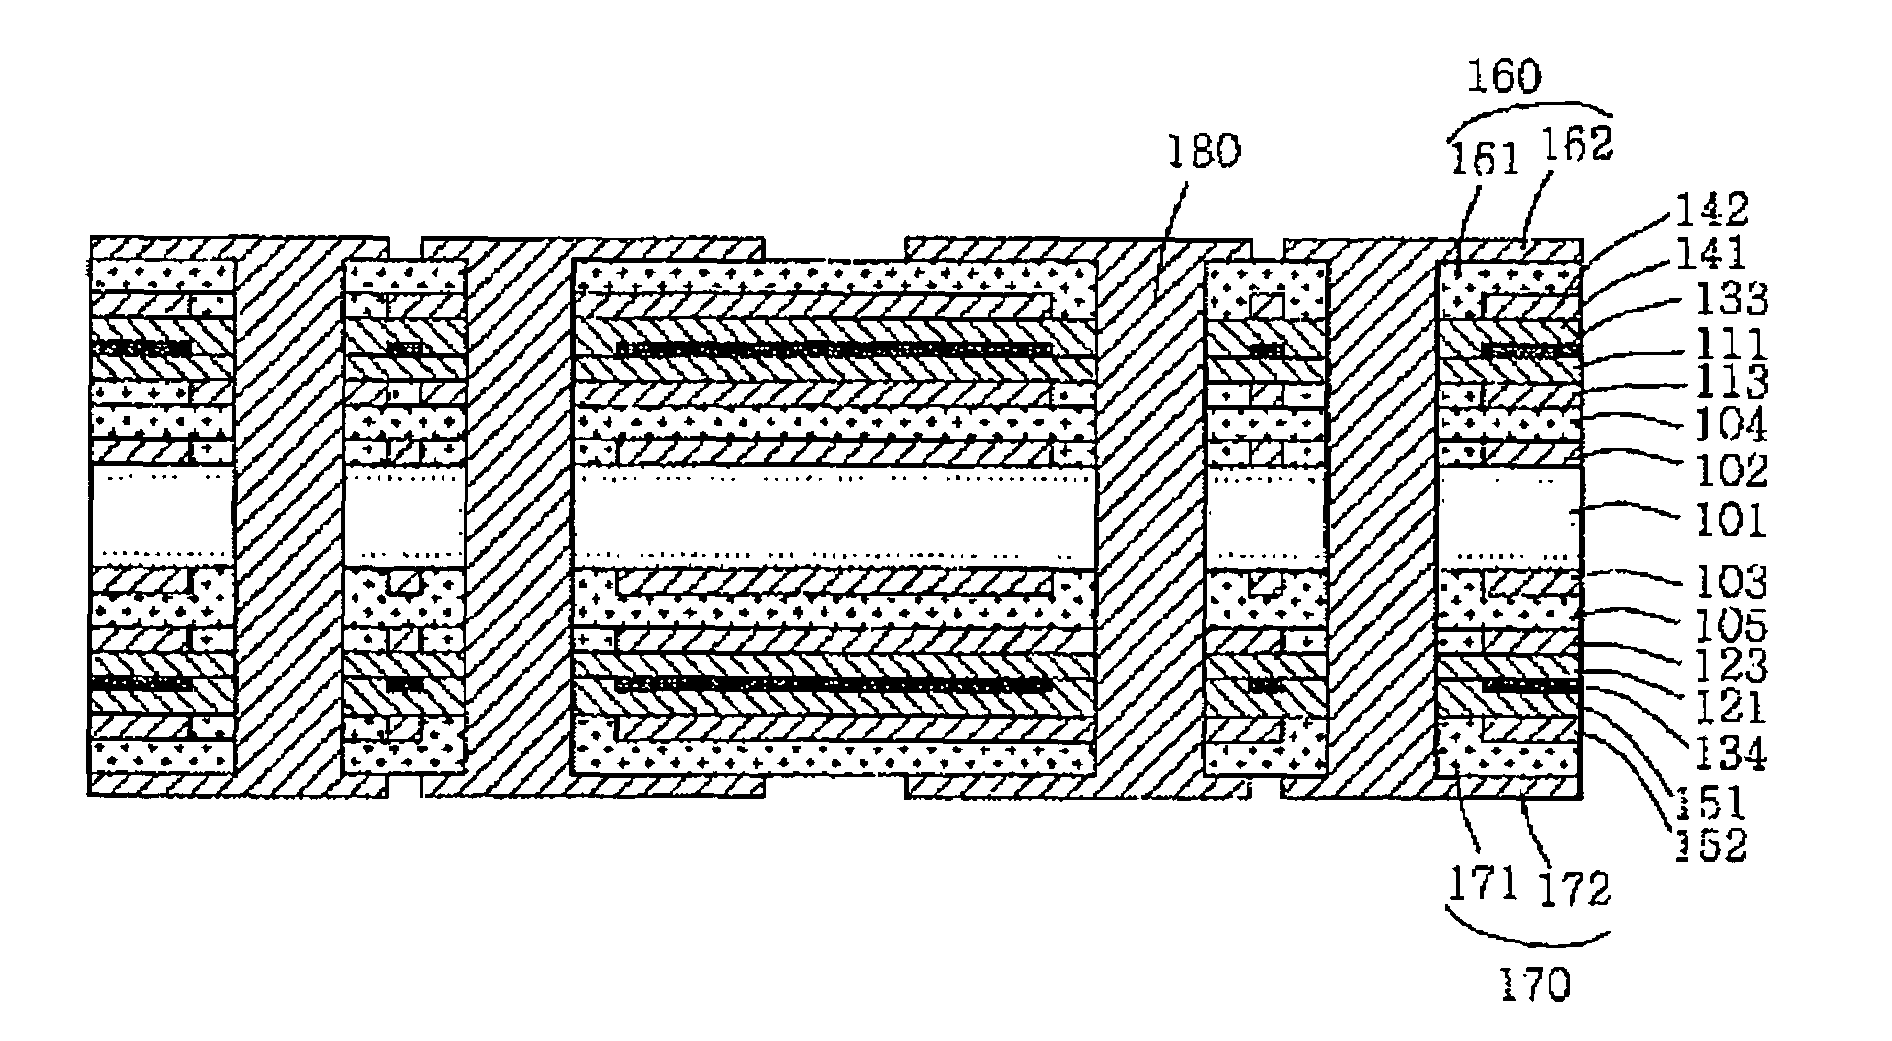 Method of fabricating printed circuit board having embedded multi-layer passive devices